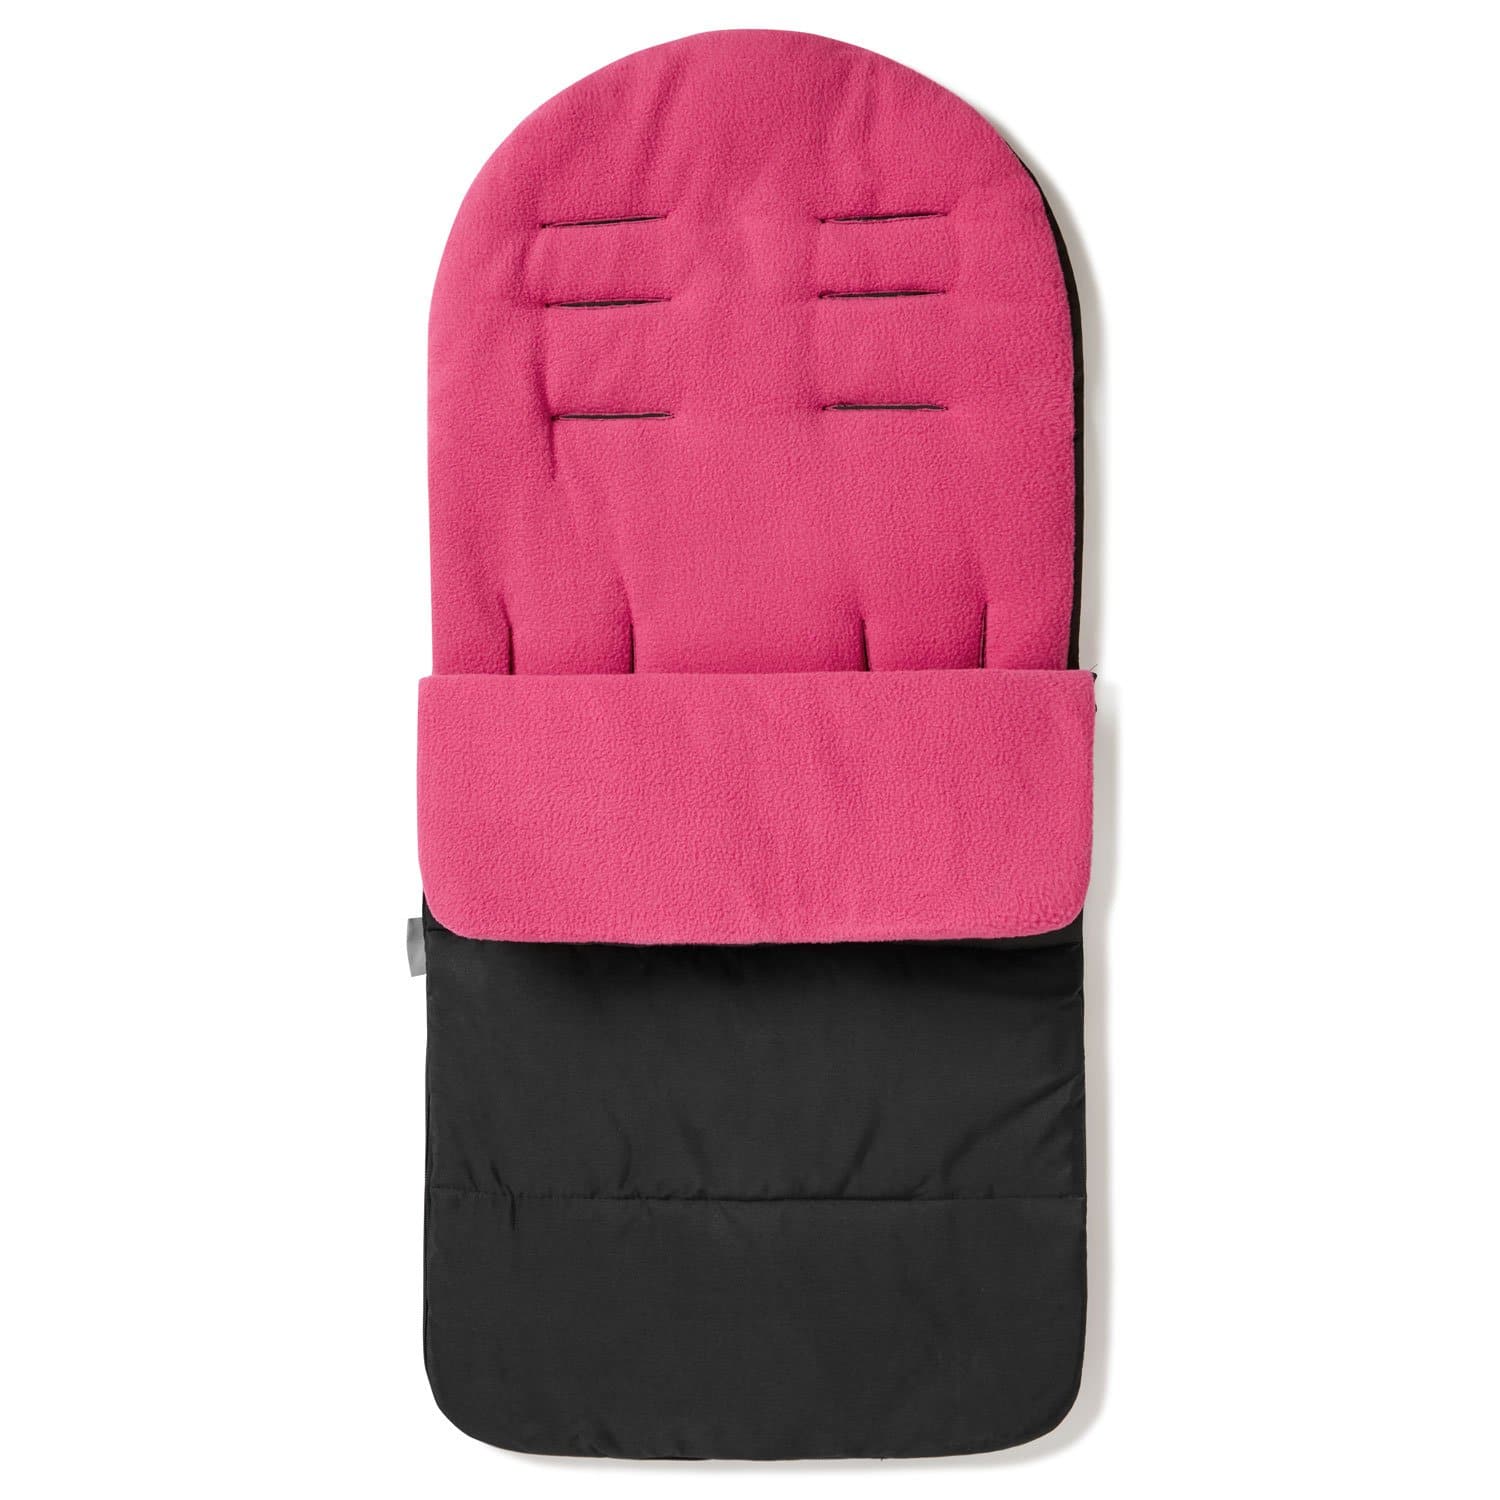 Premium Footmuff / Cosy Toes Compatible with Baby Weavers - Pink Rose / Fits All Models | For Your Little One